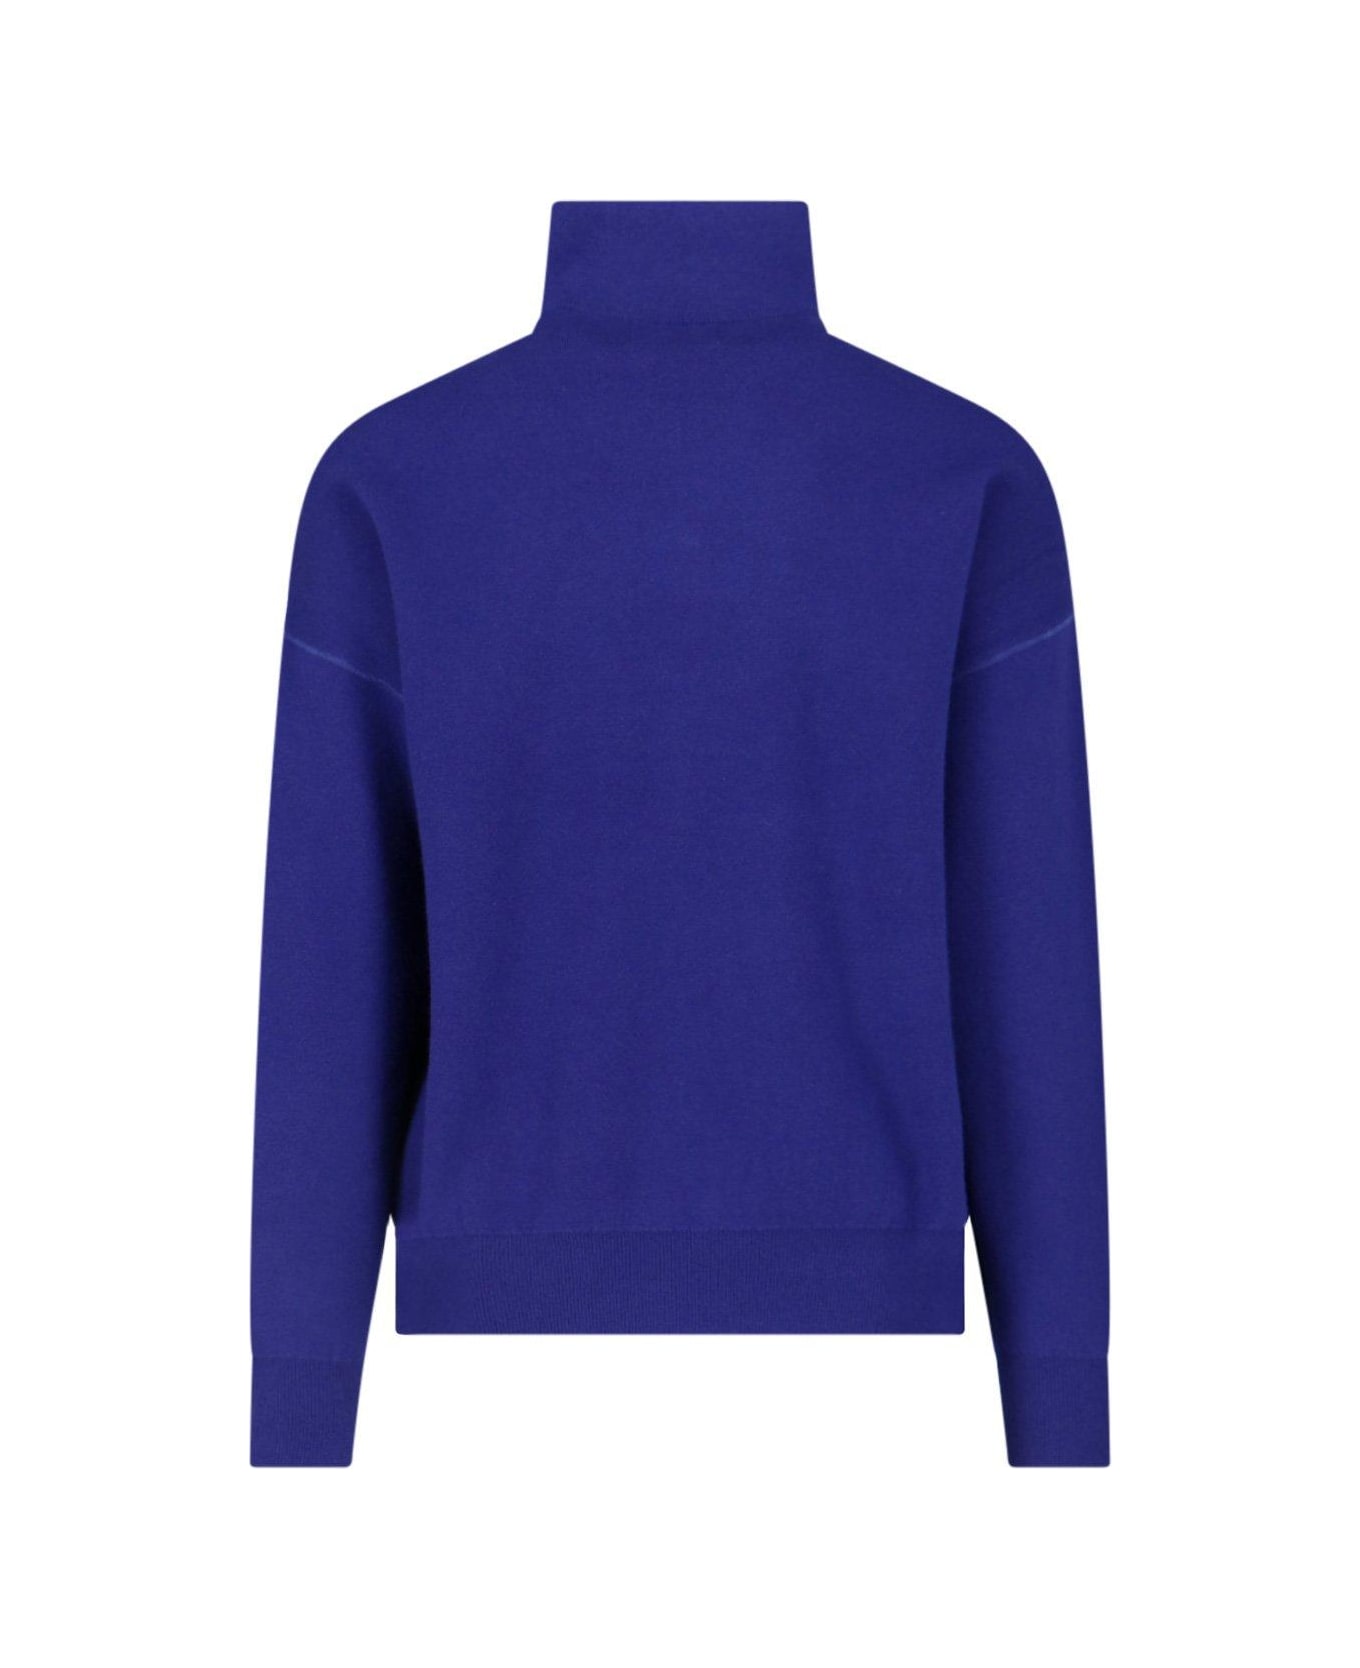 Isabel Marant High-neck Zipped Knitted Sweater - NAVY